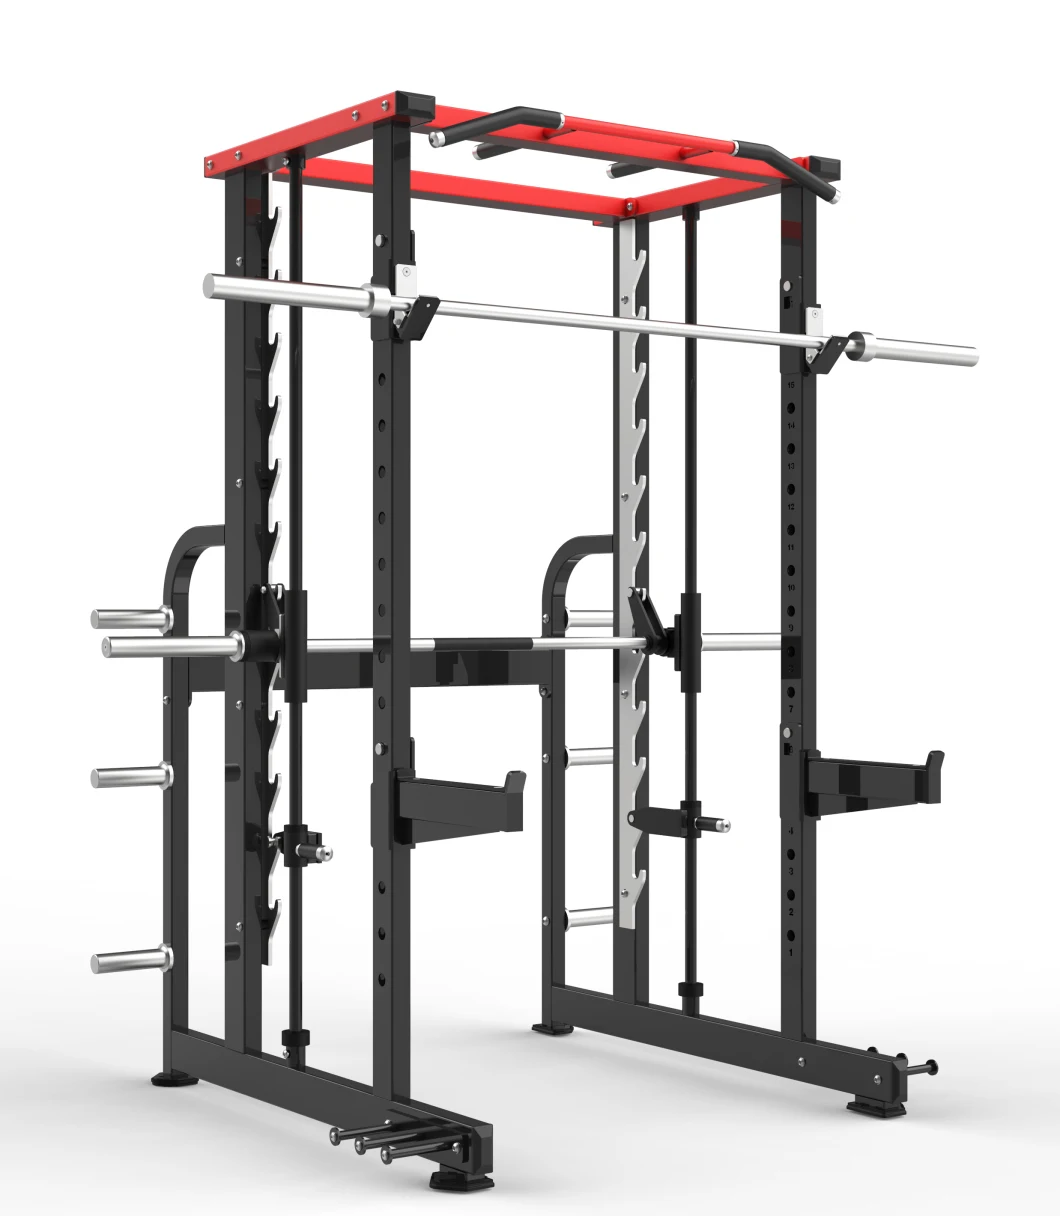 2021 Ifbb Best Selling Fitness Gym Equipment Dual Machine Smith Machine and Function Trainer